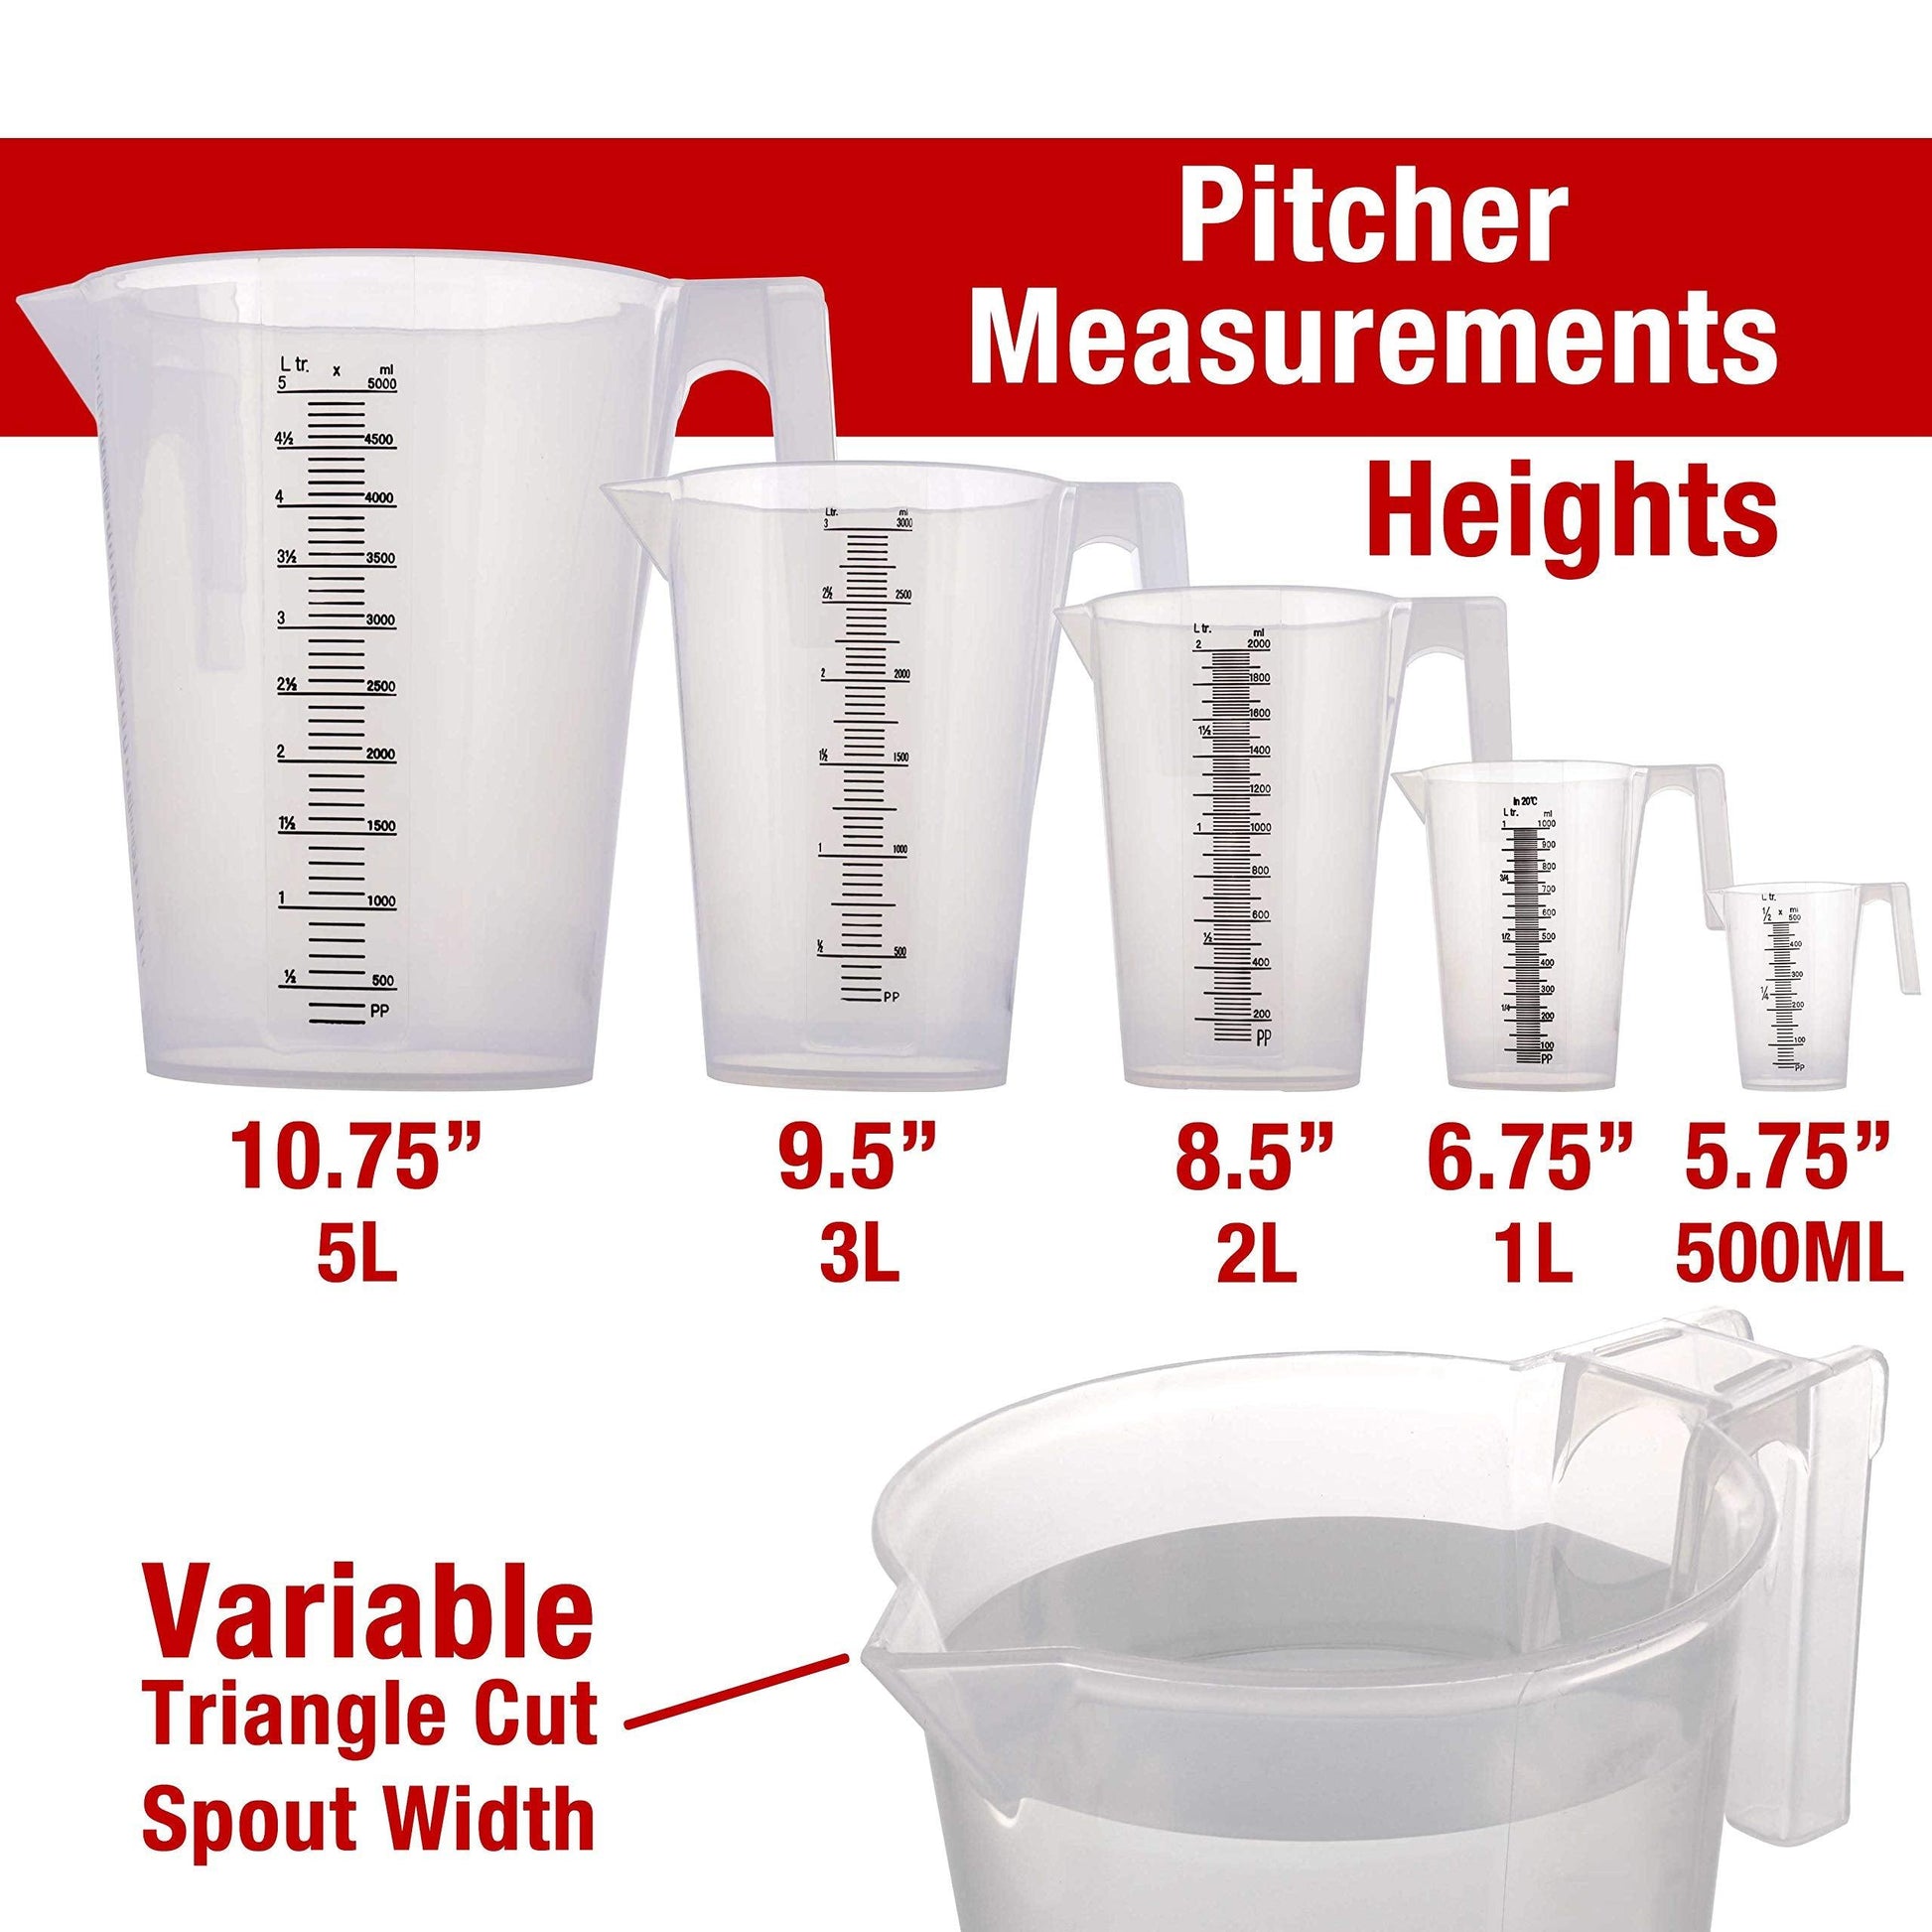 TCP Global 5 Piece Set of Plastic Graduated Measuring and Mixing Pitchers - 500, 1000 Quart, 2000, 3000, 5000 ml Gallon Sizes - Pouring Cups, Measure & Mix Paint, Resin, Epoxy, Kitchen Cooking Baking - CookCave